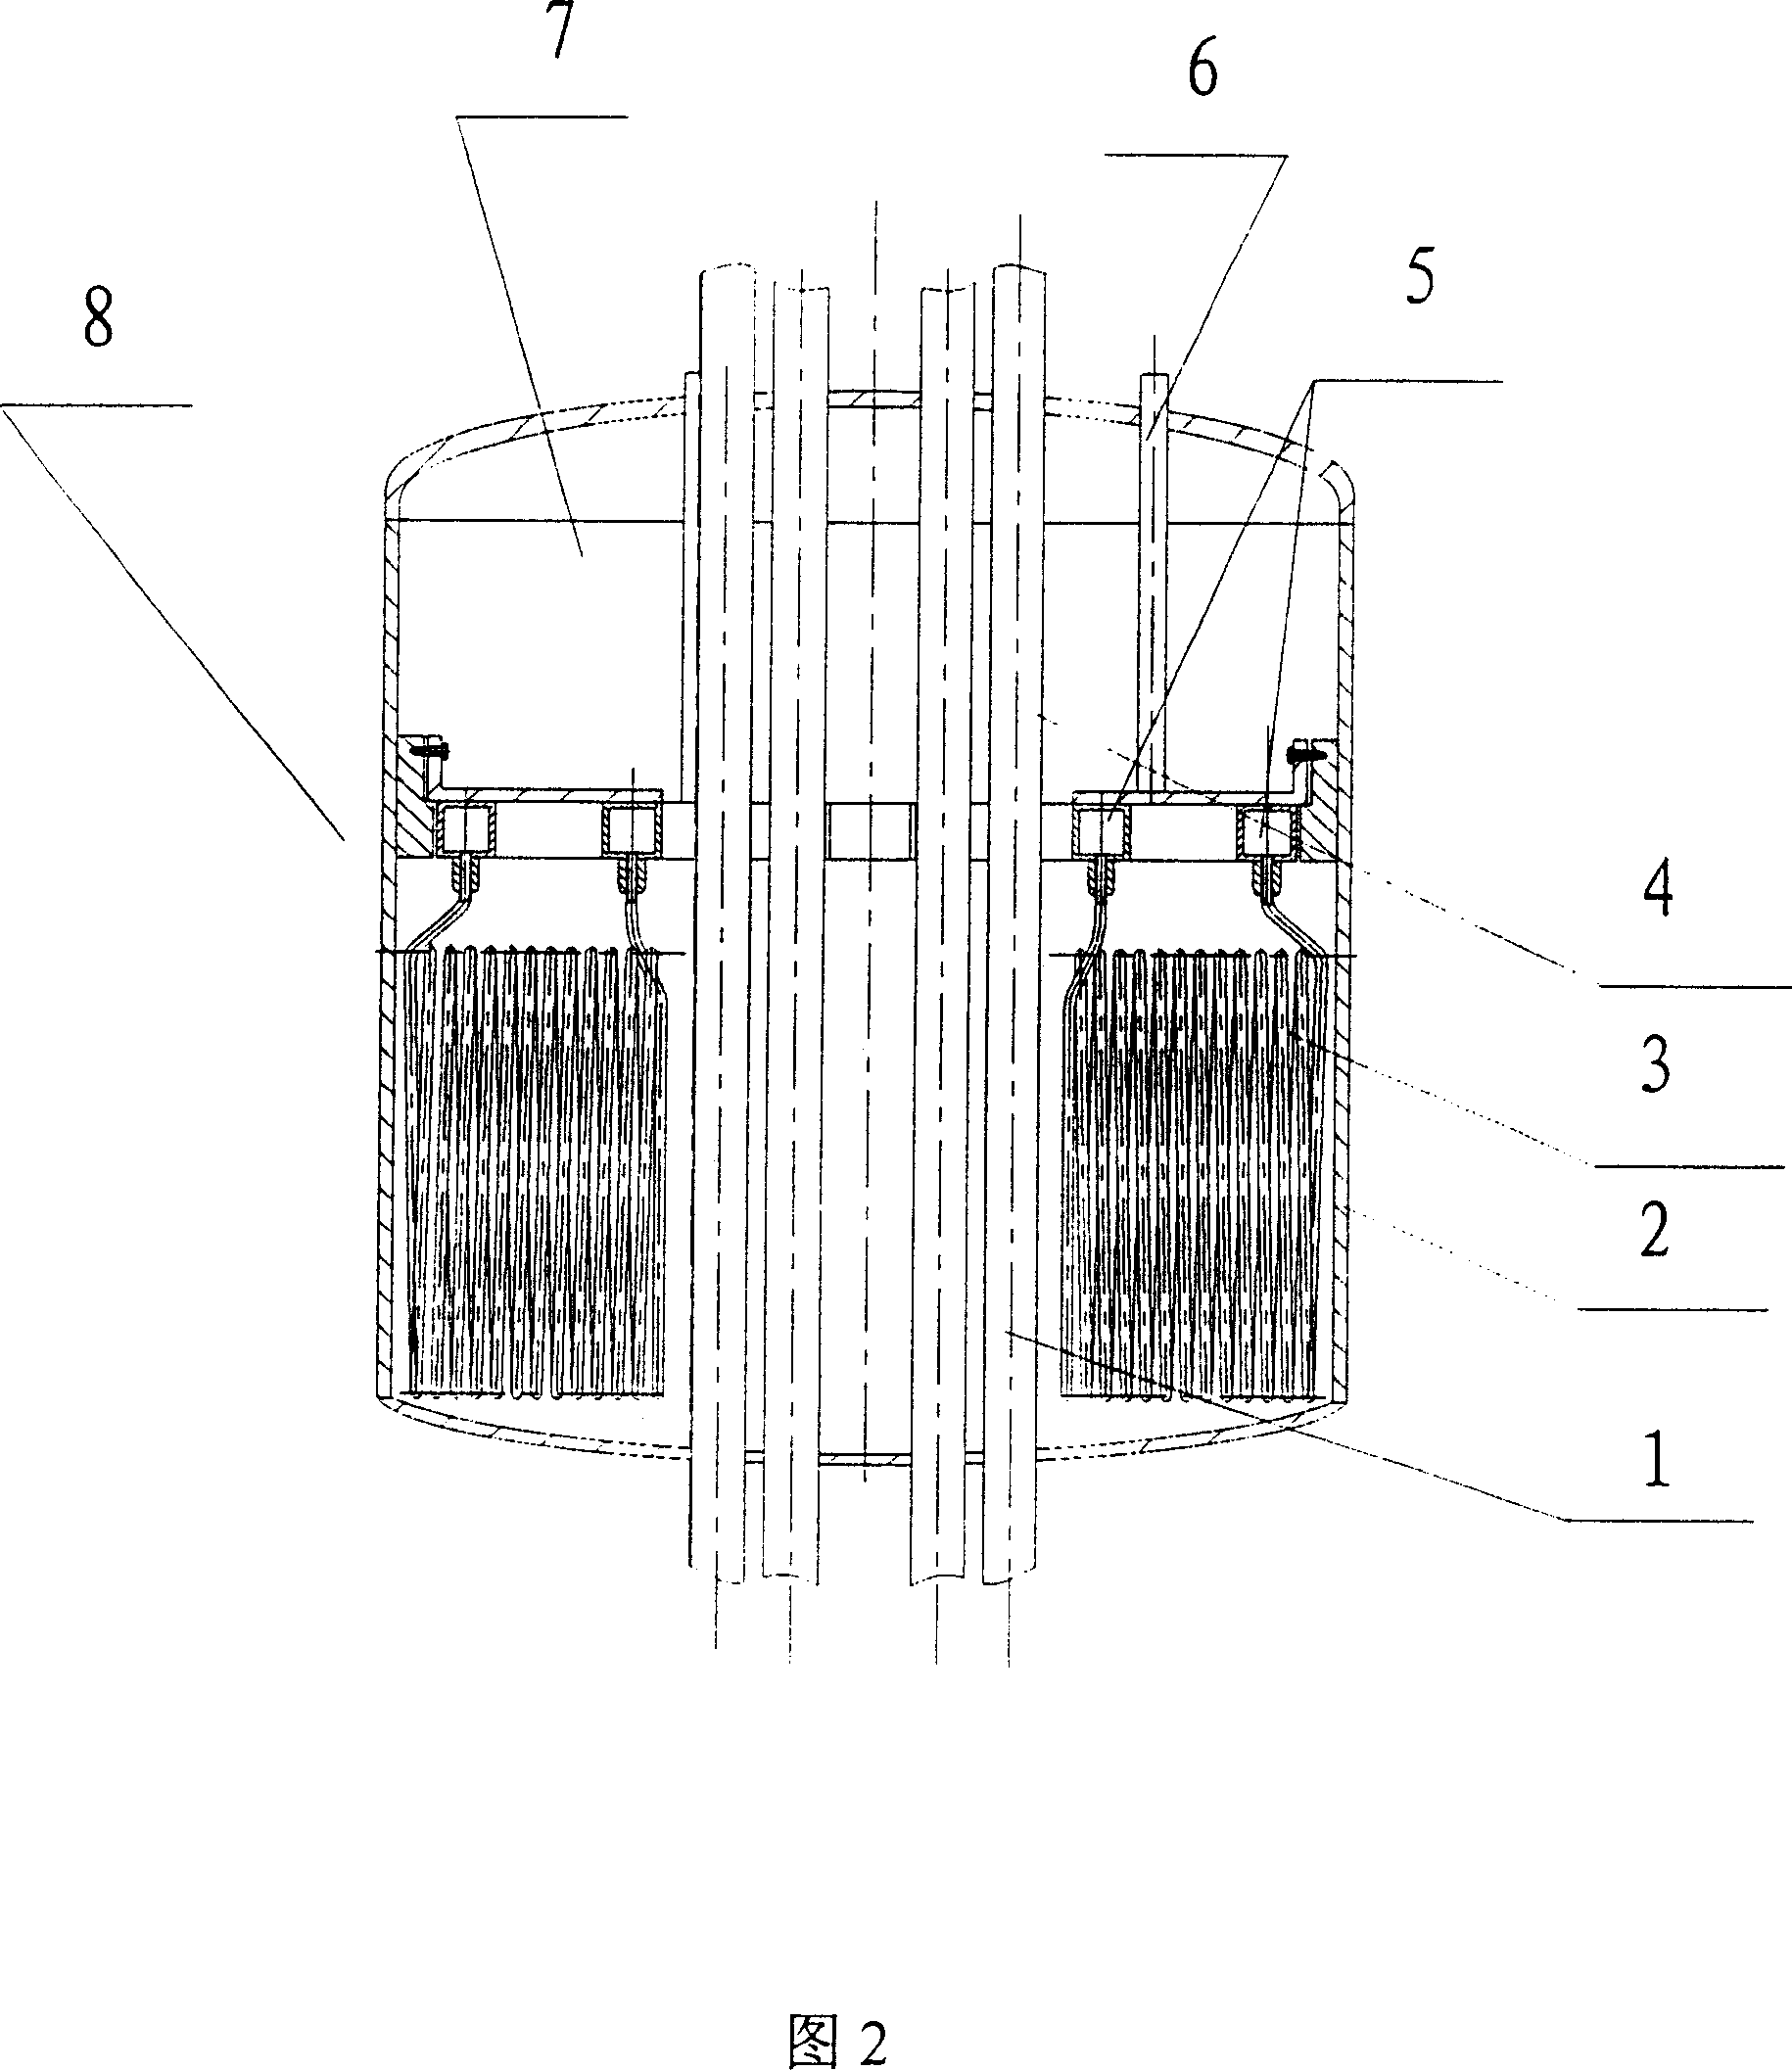 Water boiler solution nuclear reactor having inherent security